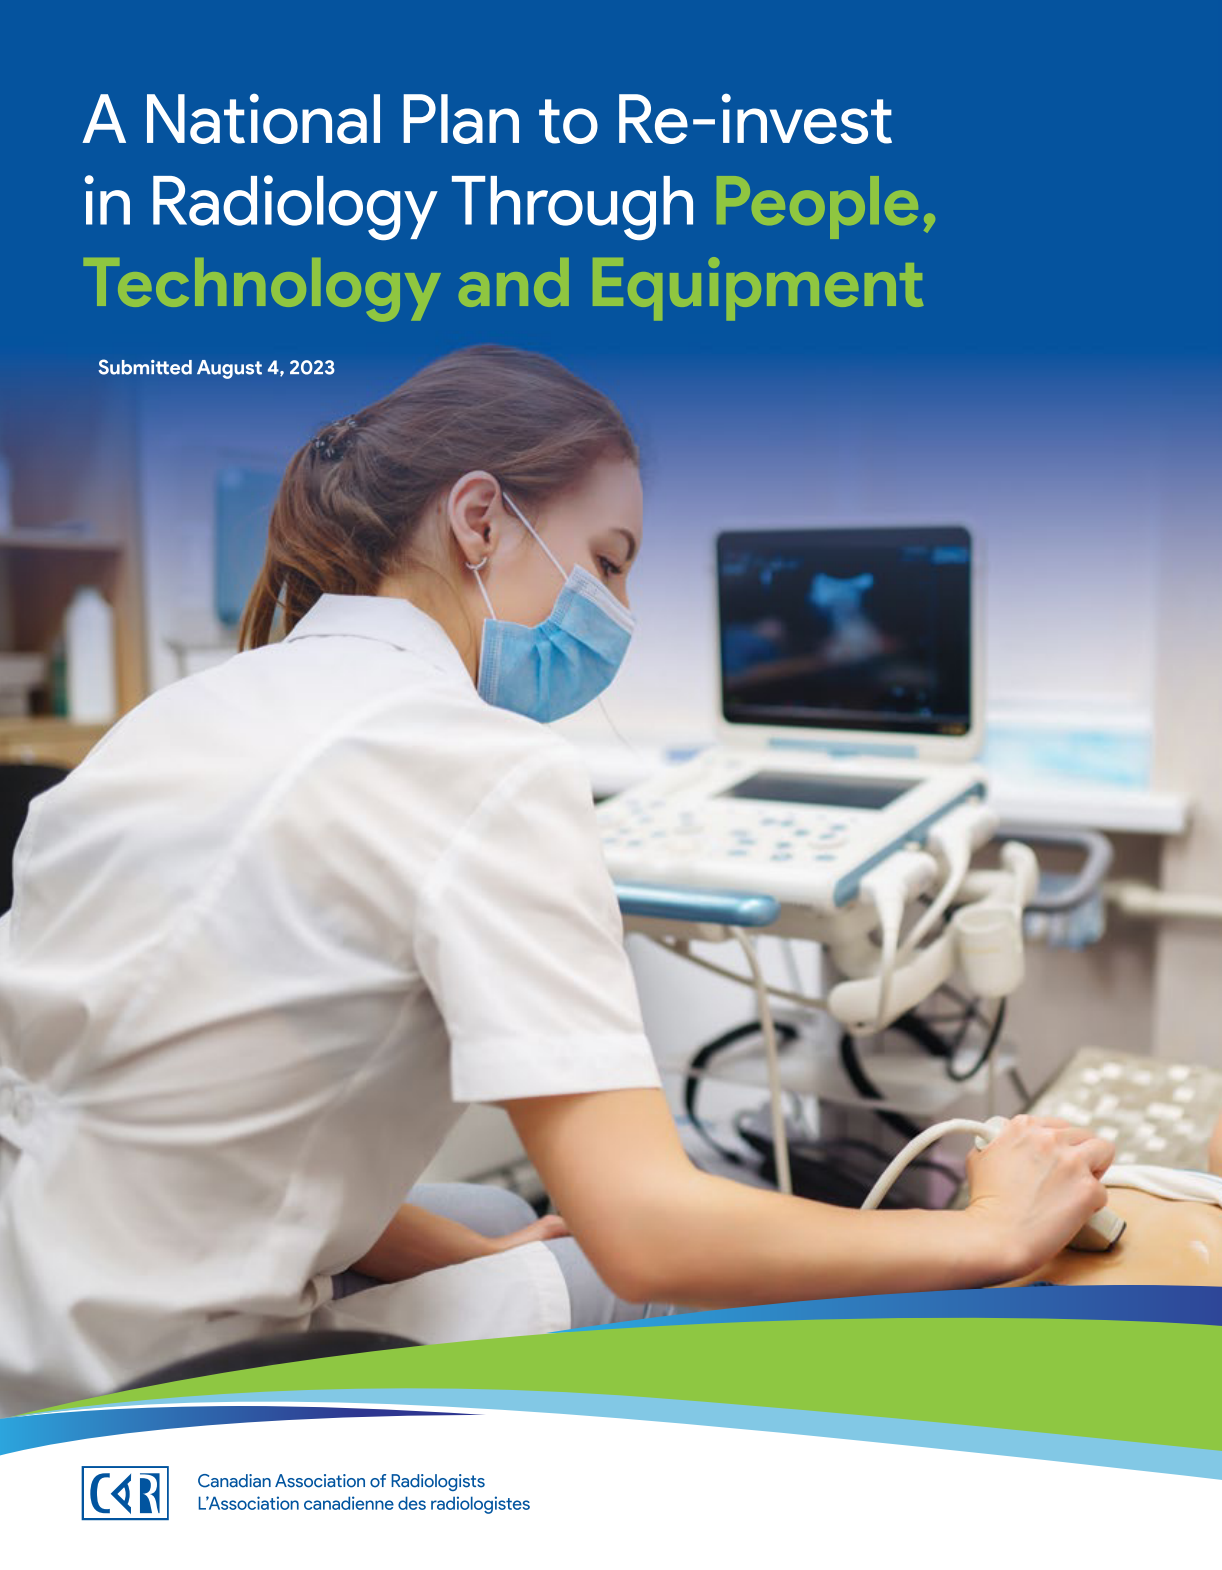 Reinvesting in Radiology Through People, Technology and Equipment